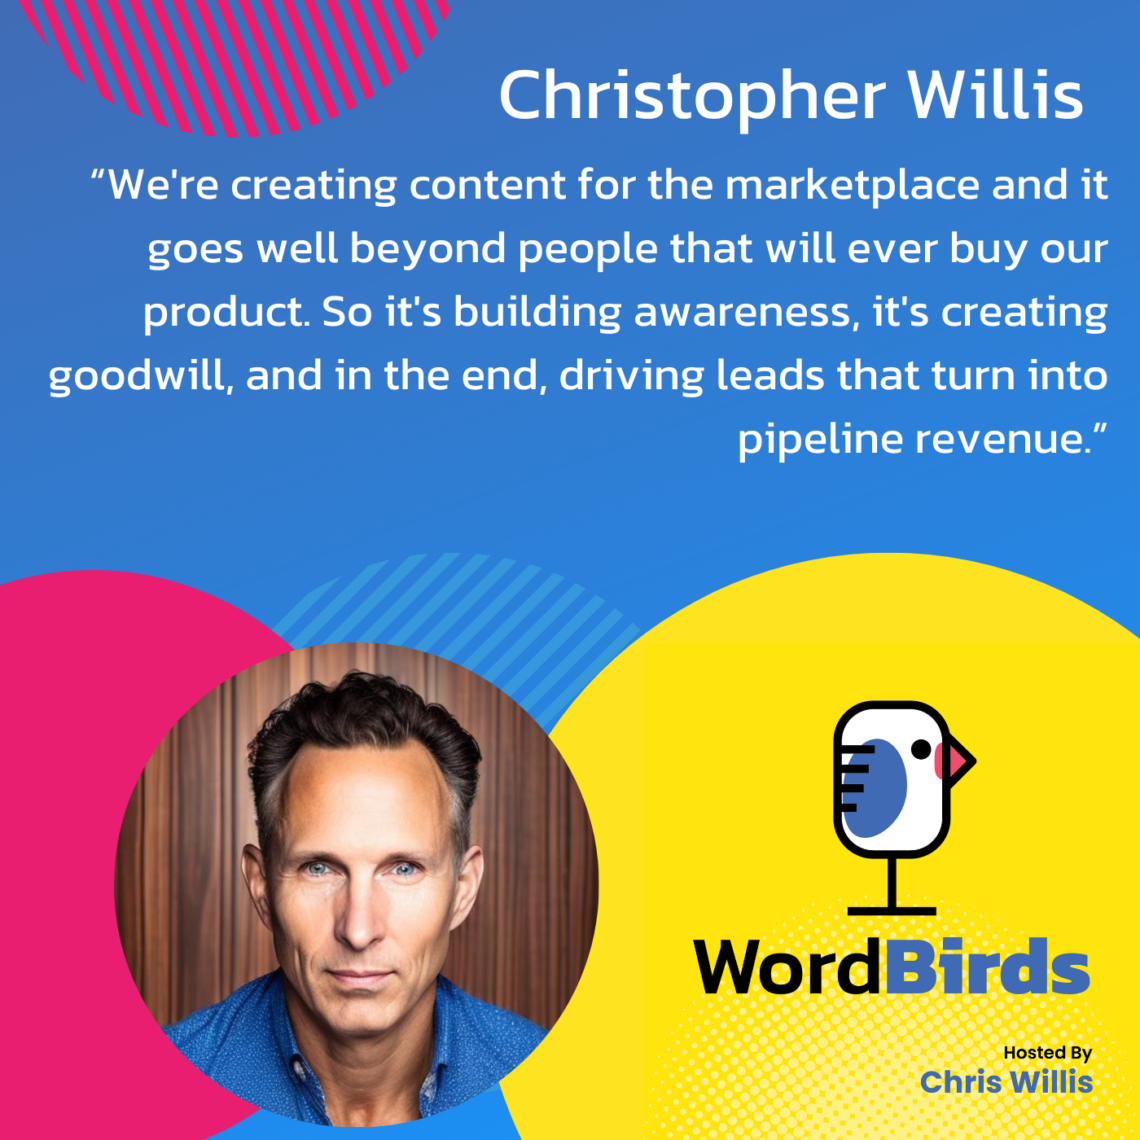 On a blue background there's a quote from Christopher Willis in white that takes up the majority of the image. The bottom of the image has a headshot image of Christopher and the WordBirds Podcast logo.